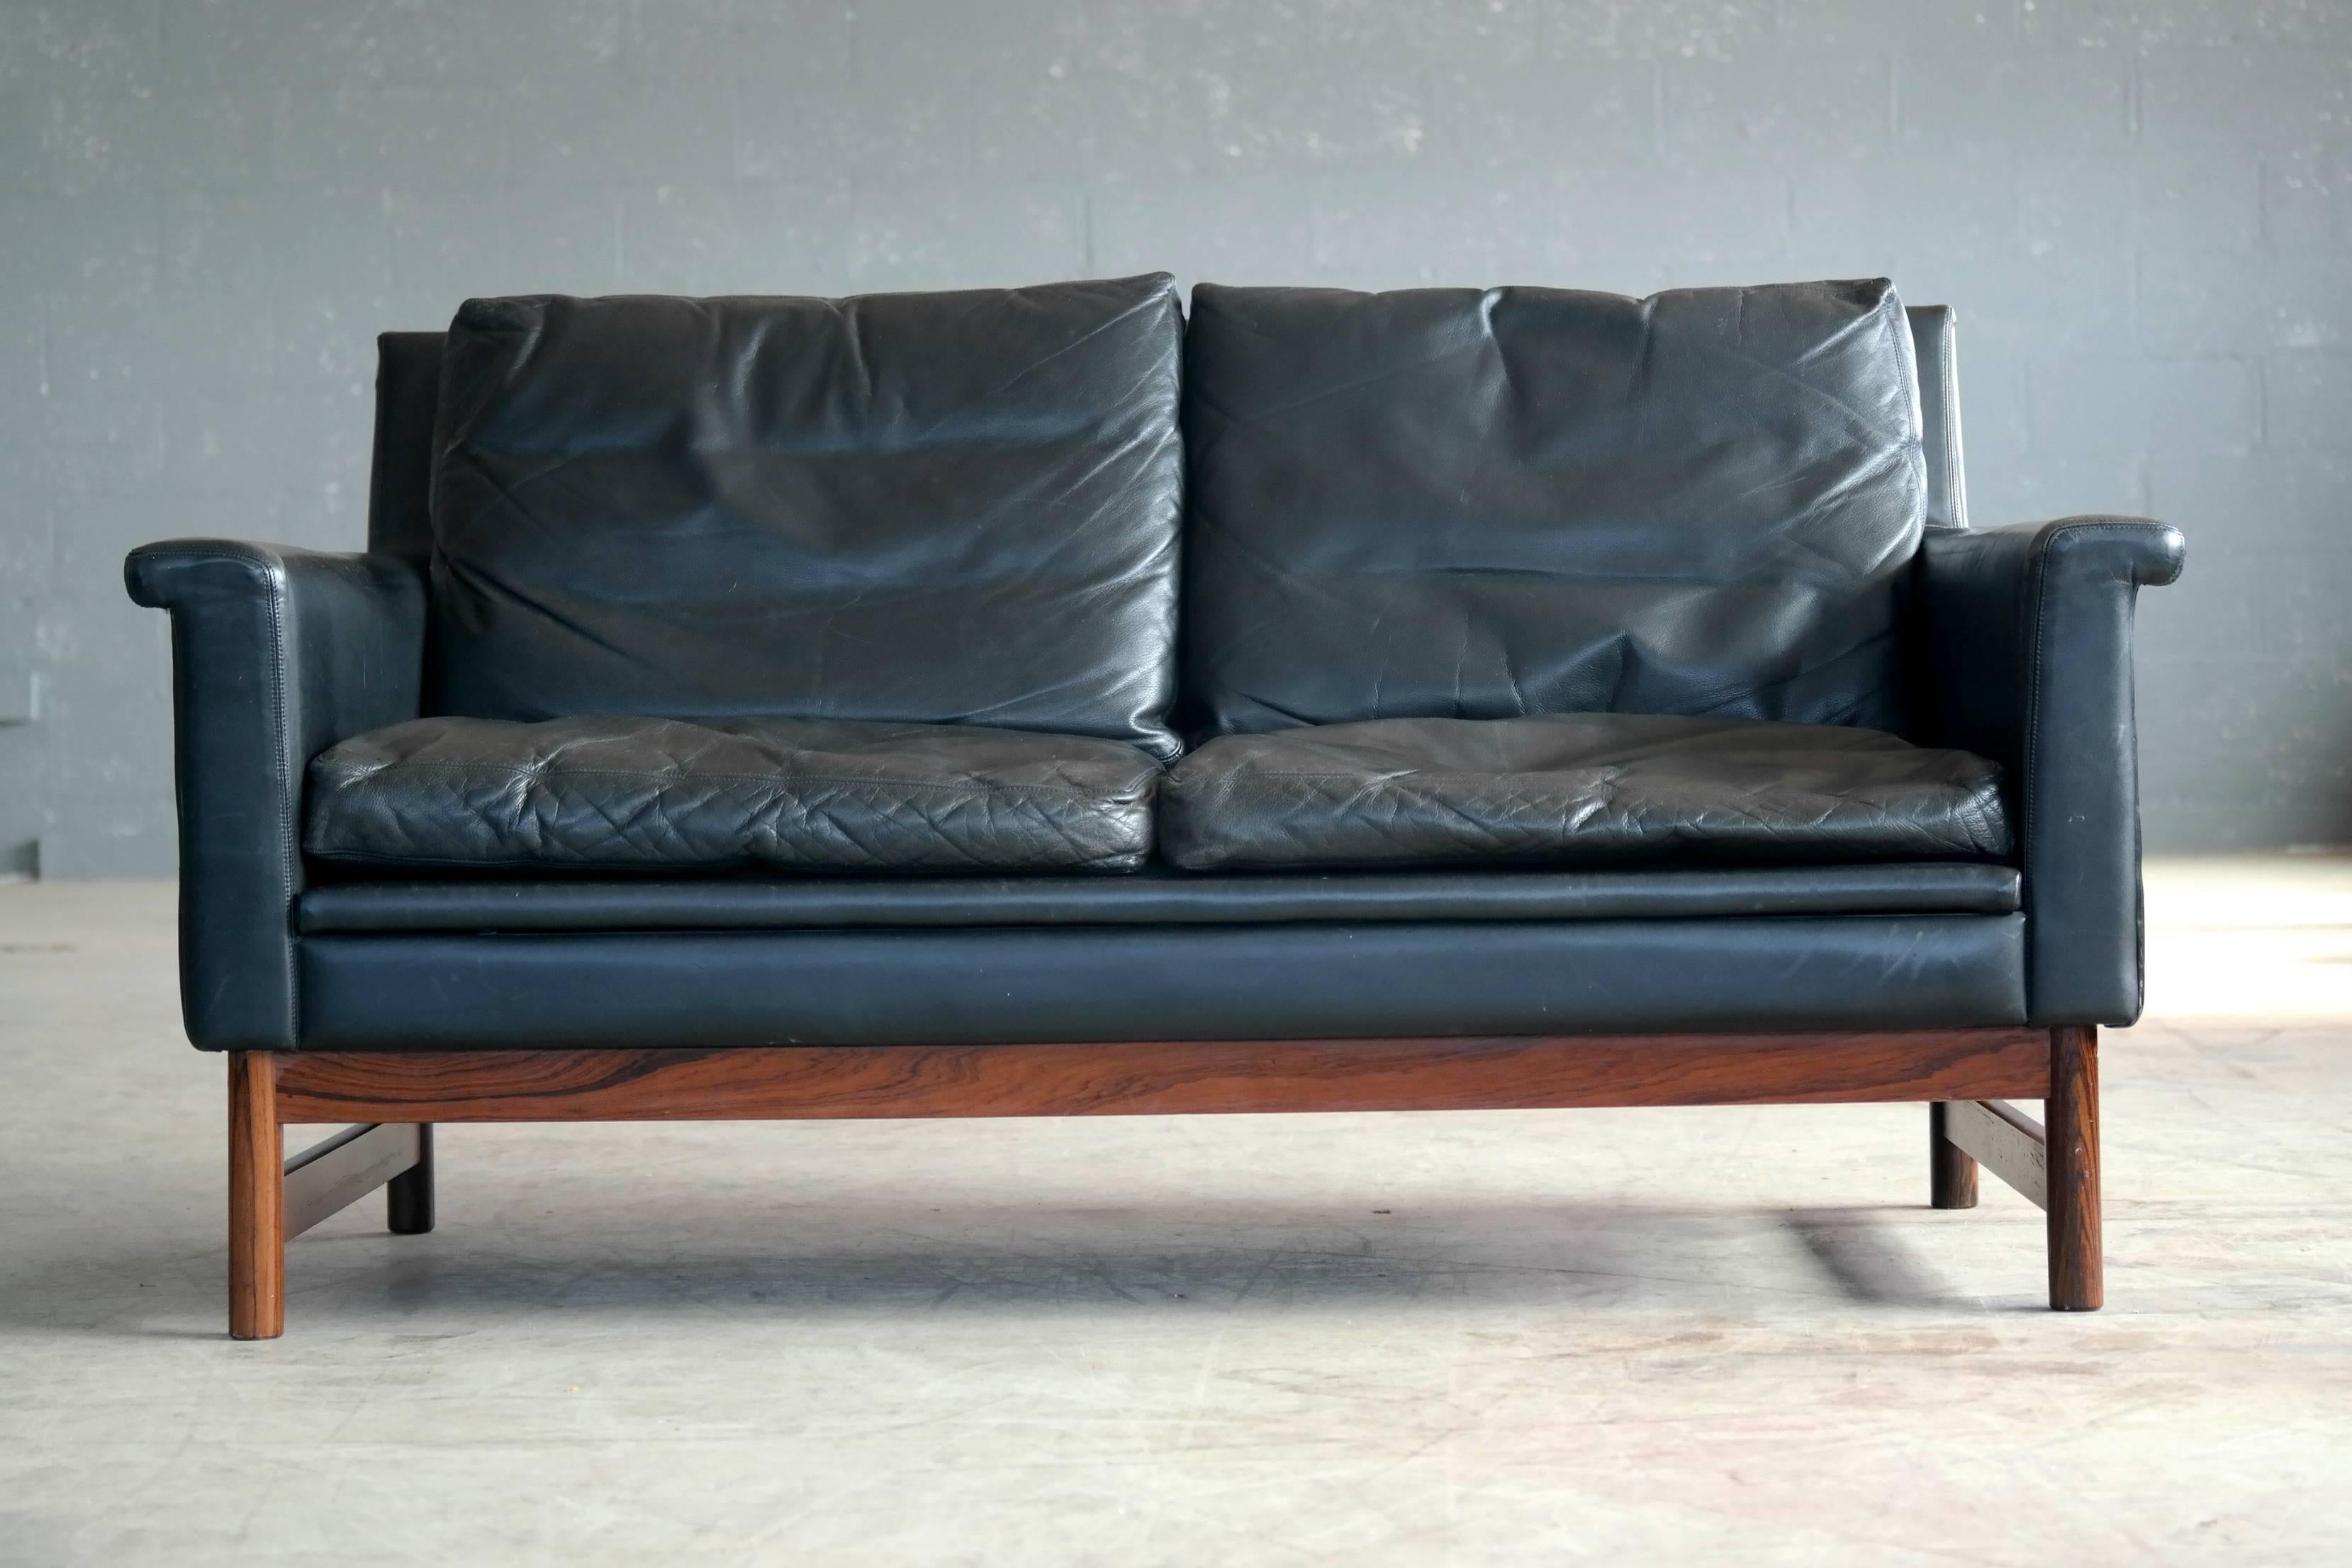 Superb and rare two-seat sofa or loveseat by Scapa of Sweden, circa 1965. Scapa made some really high-end furniture back in the 1960s but changed course circa 1970 to focus on making beds. This rare sofa is features very high quality craftsmanship